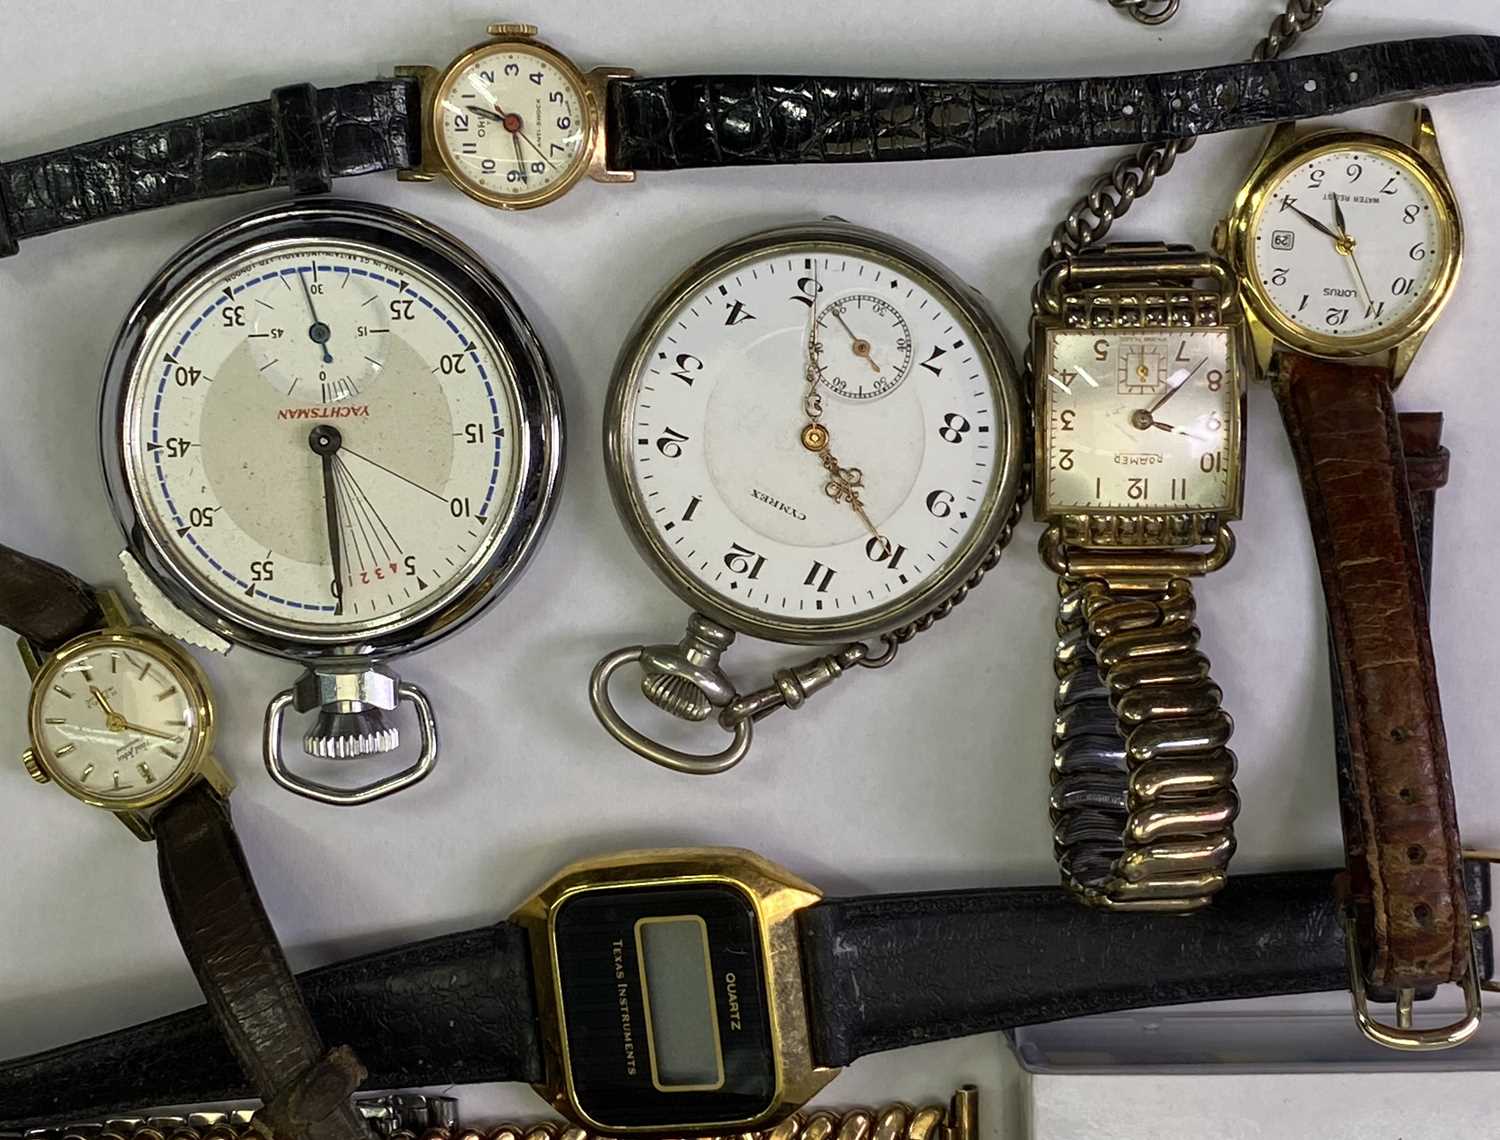 LADY'S & GENT'S WRISTWATCHES and other time pieces group, to include a Cymrex base metal pocket - Image 2 of 3